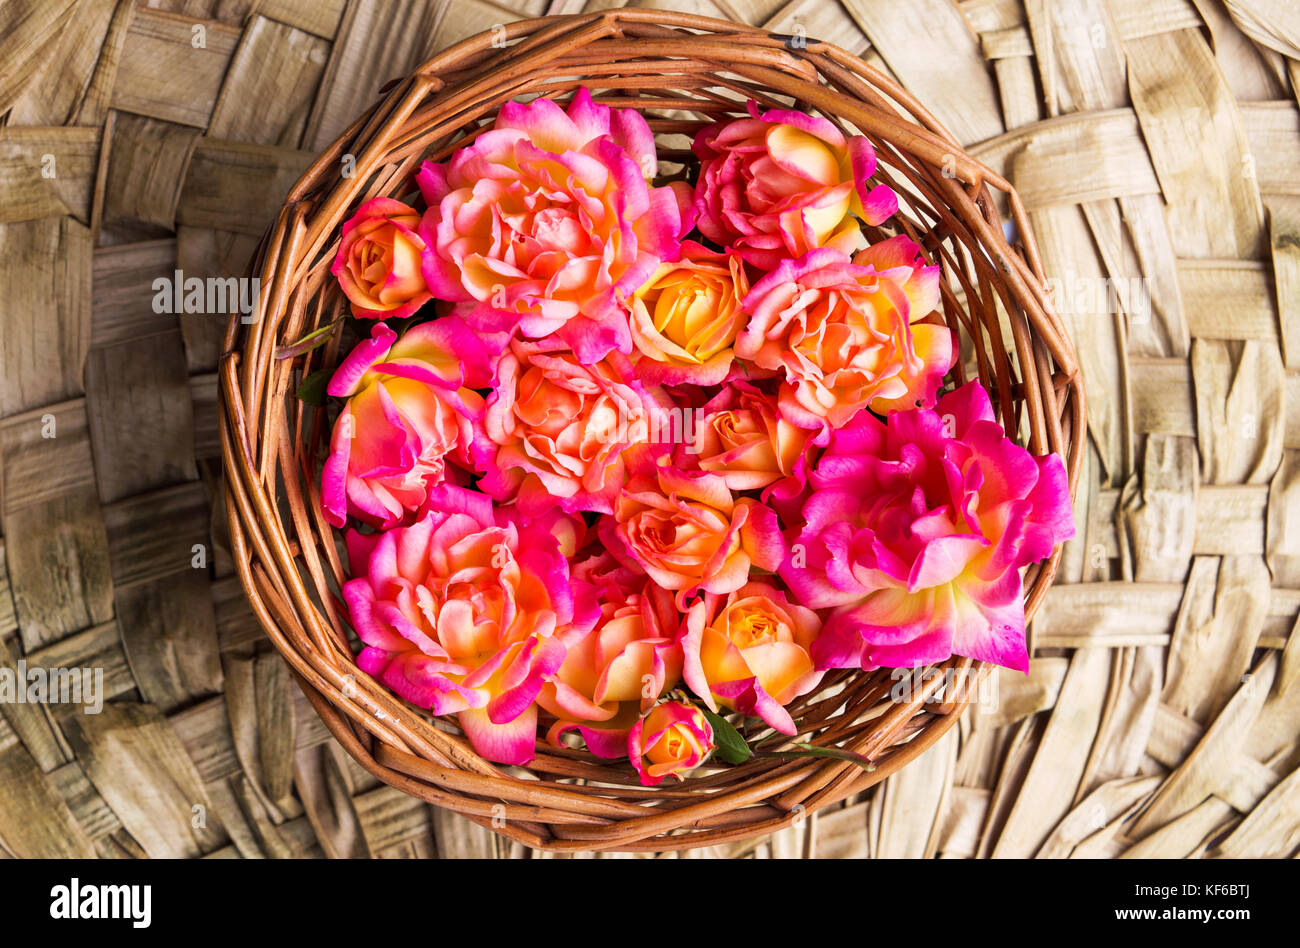 Red and orange roses in a wicker bowl Stock Photo